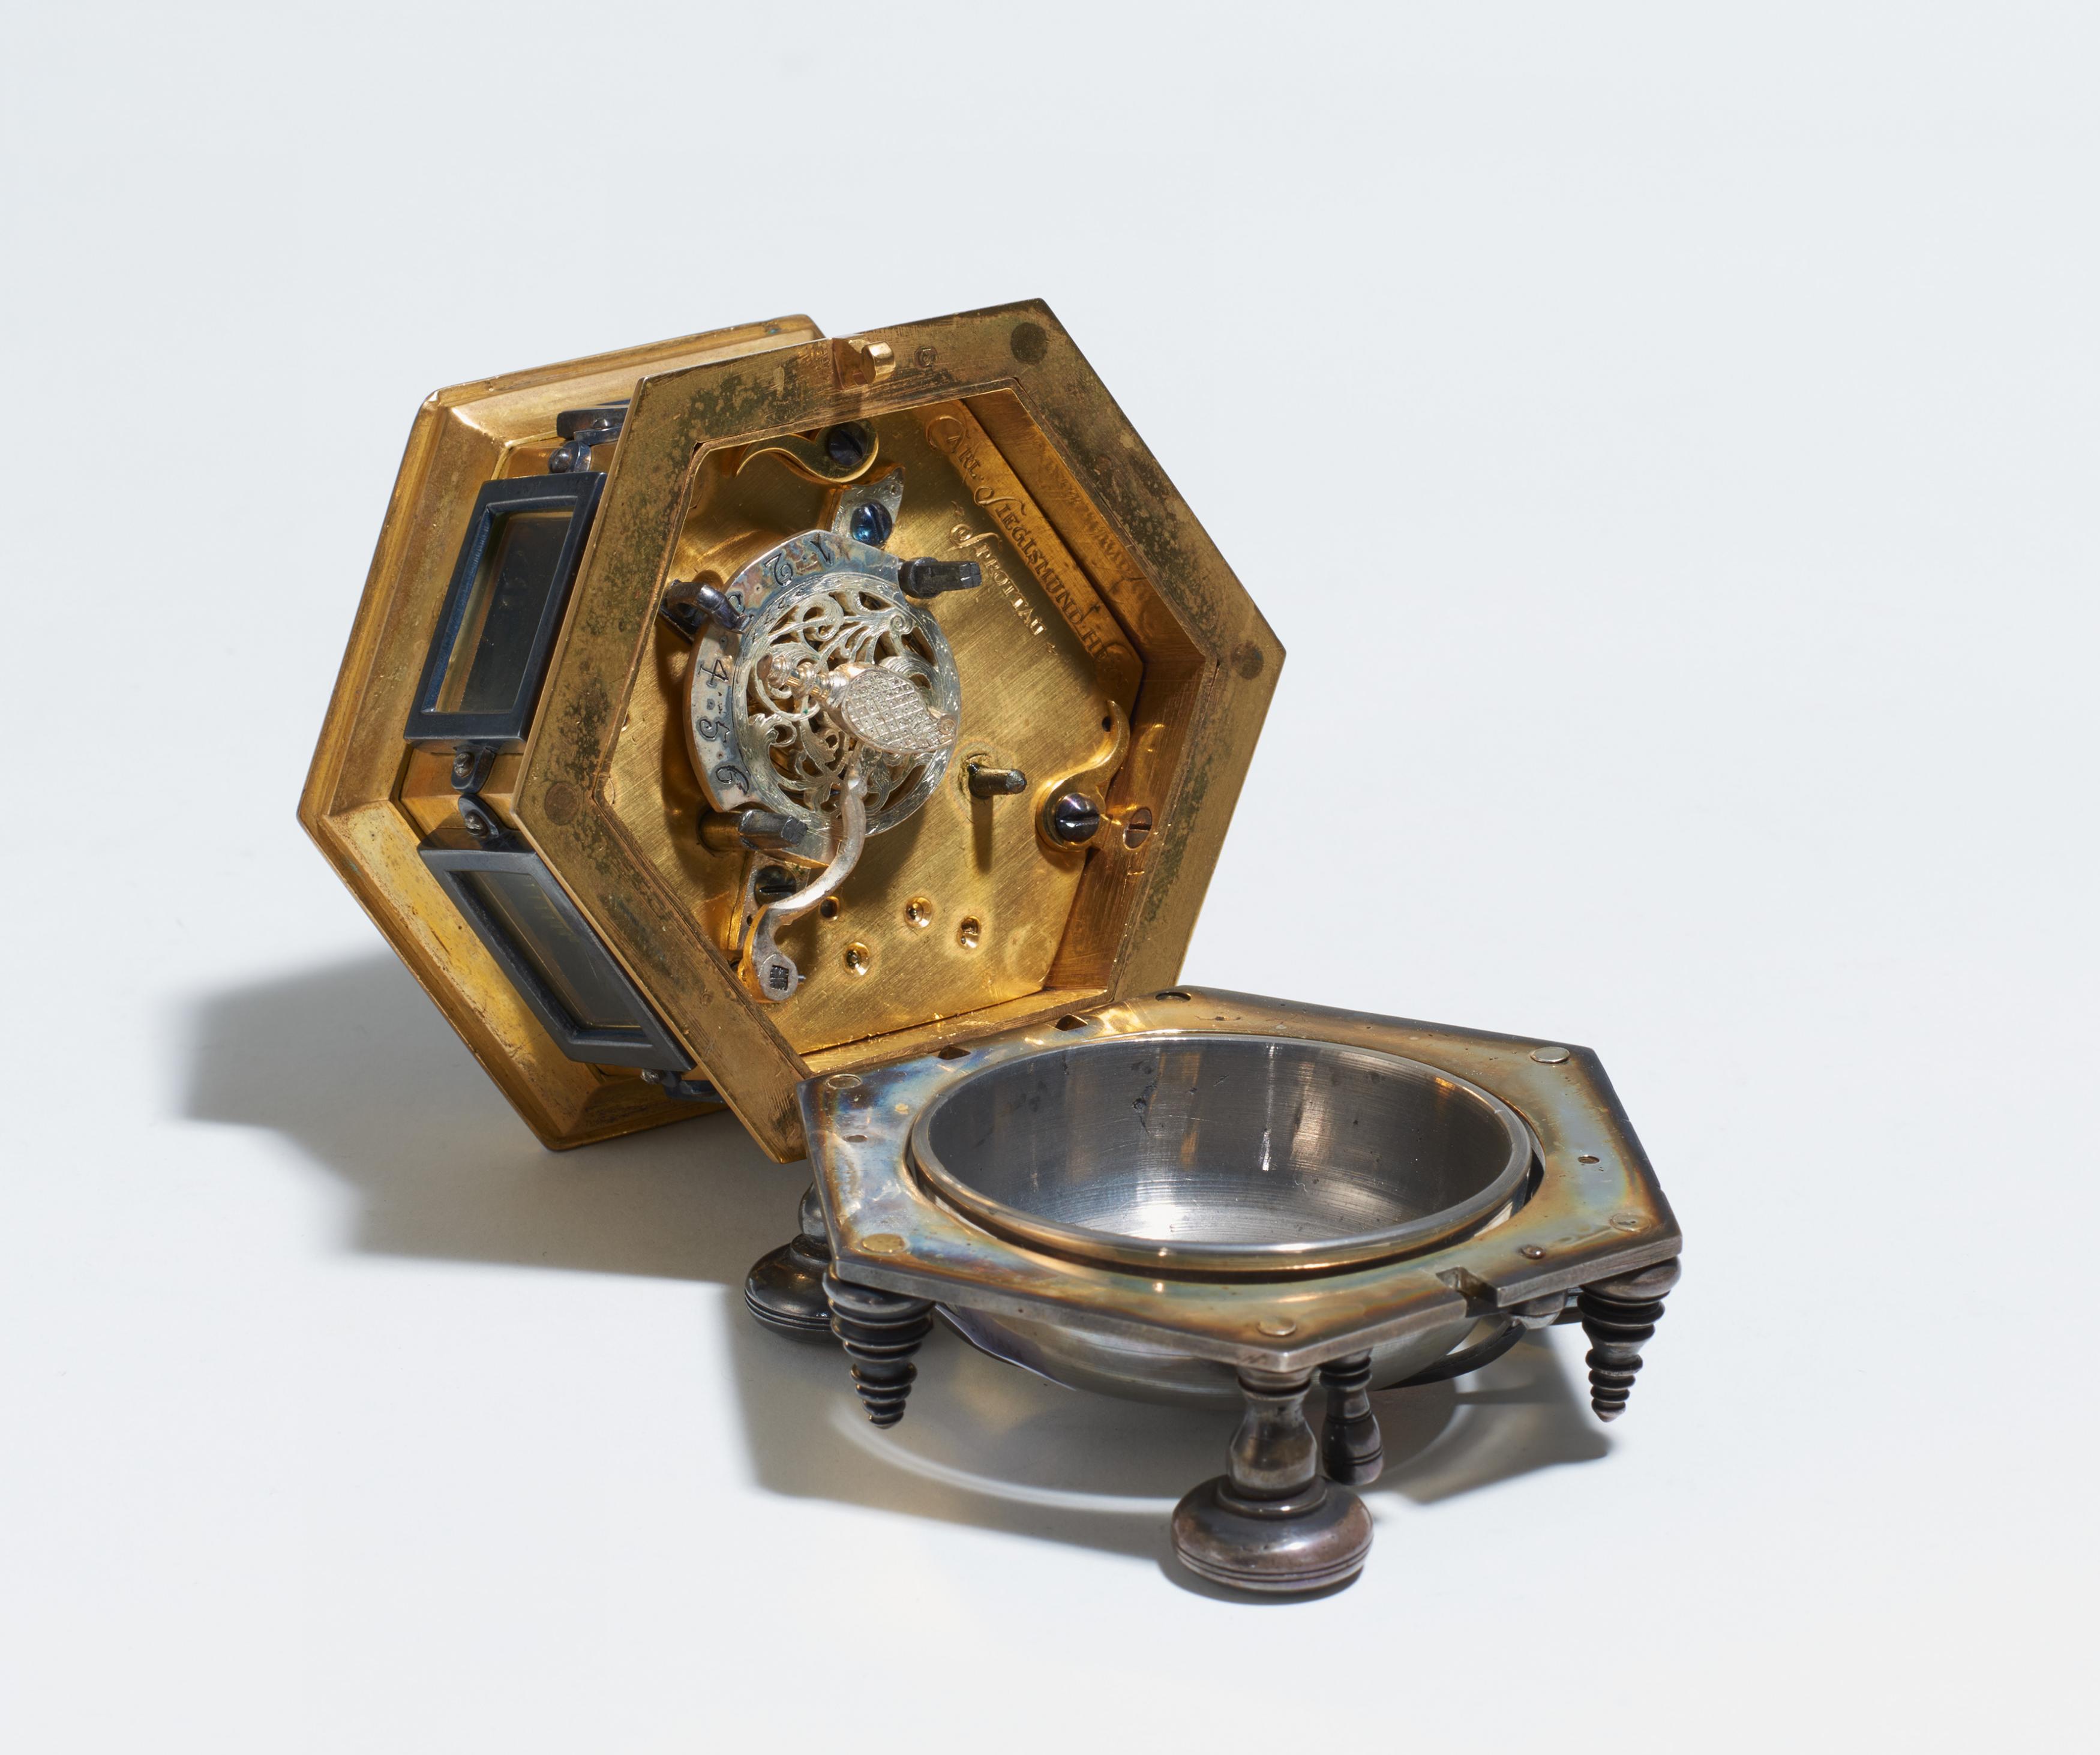 HEXAGONAL BAROQUE TABLE CLOCK MADE OF GILT BRONZE WITH RESIDUES OF SILVER PLATING AND GLASS. - Image 3 of 10